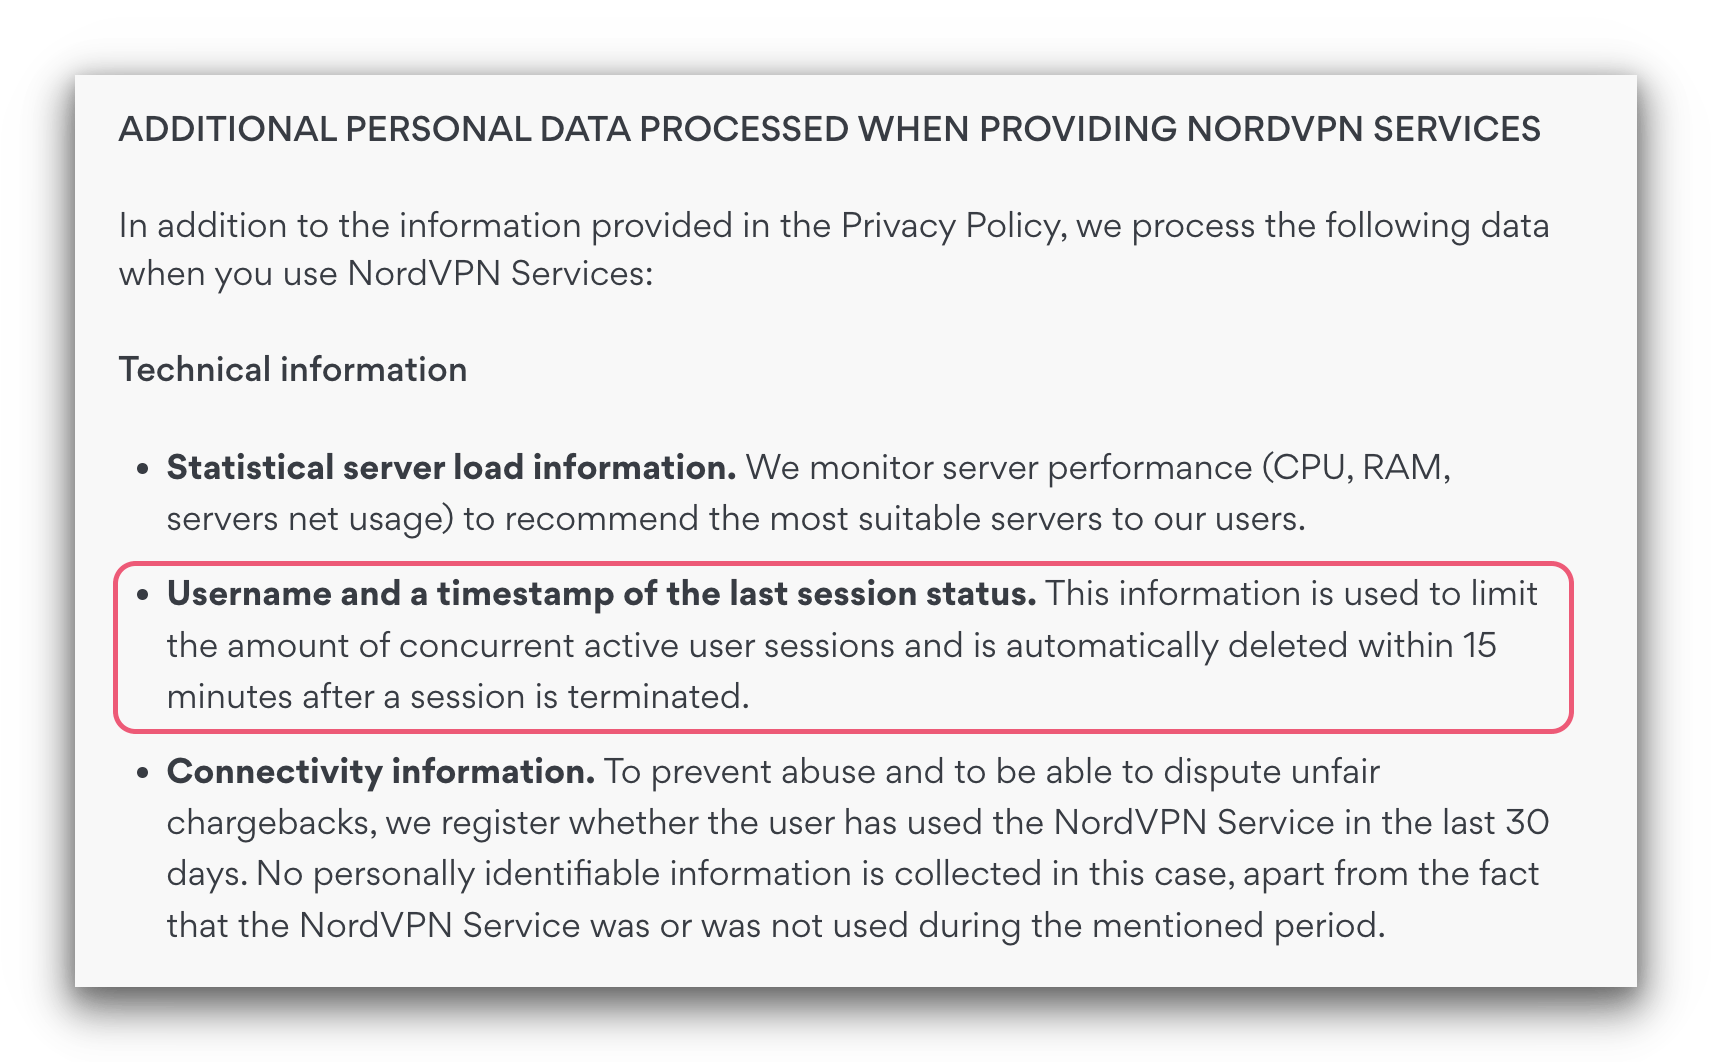 Screenshot of NordVPN's Privacy Policy that states it stores your username and timestamp of when you logged in for 15 mins after a session finishes.